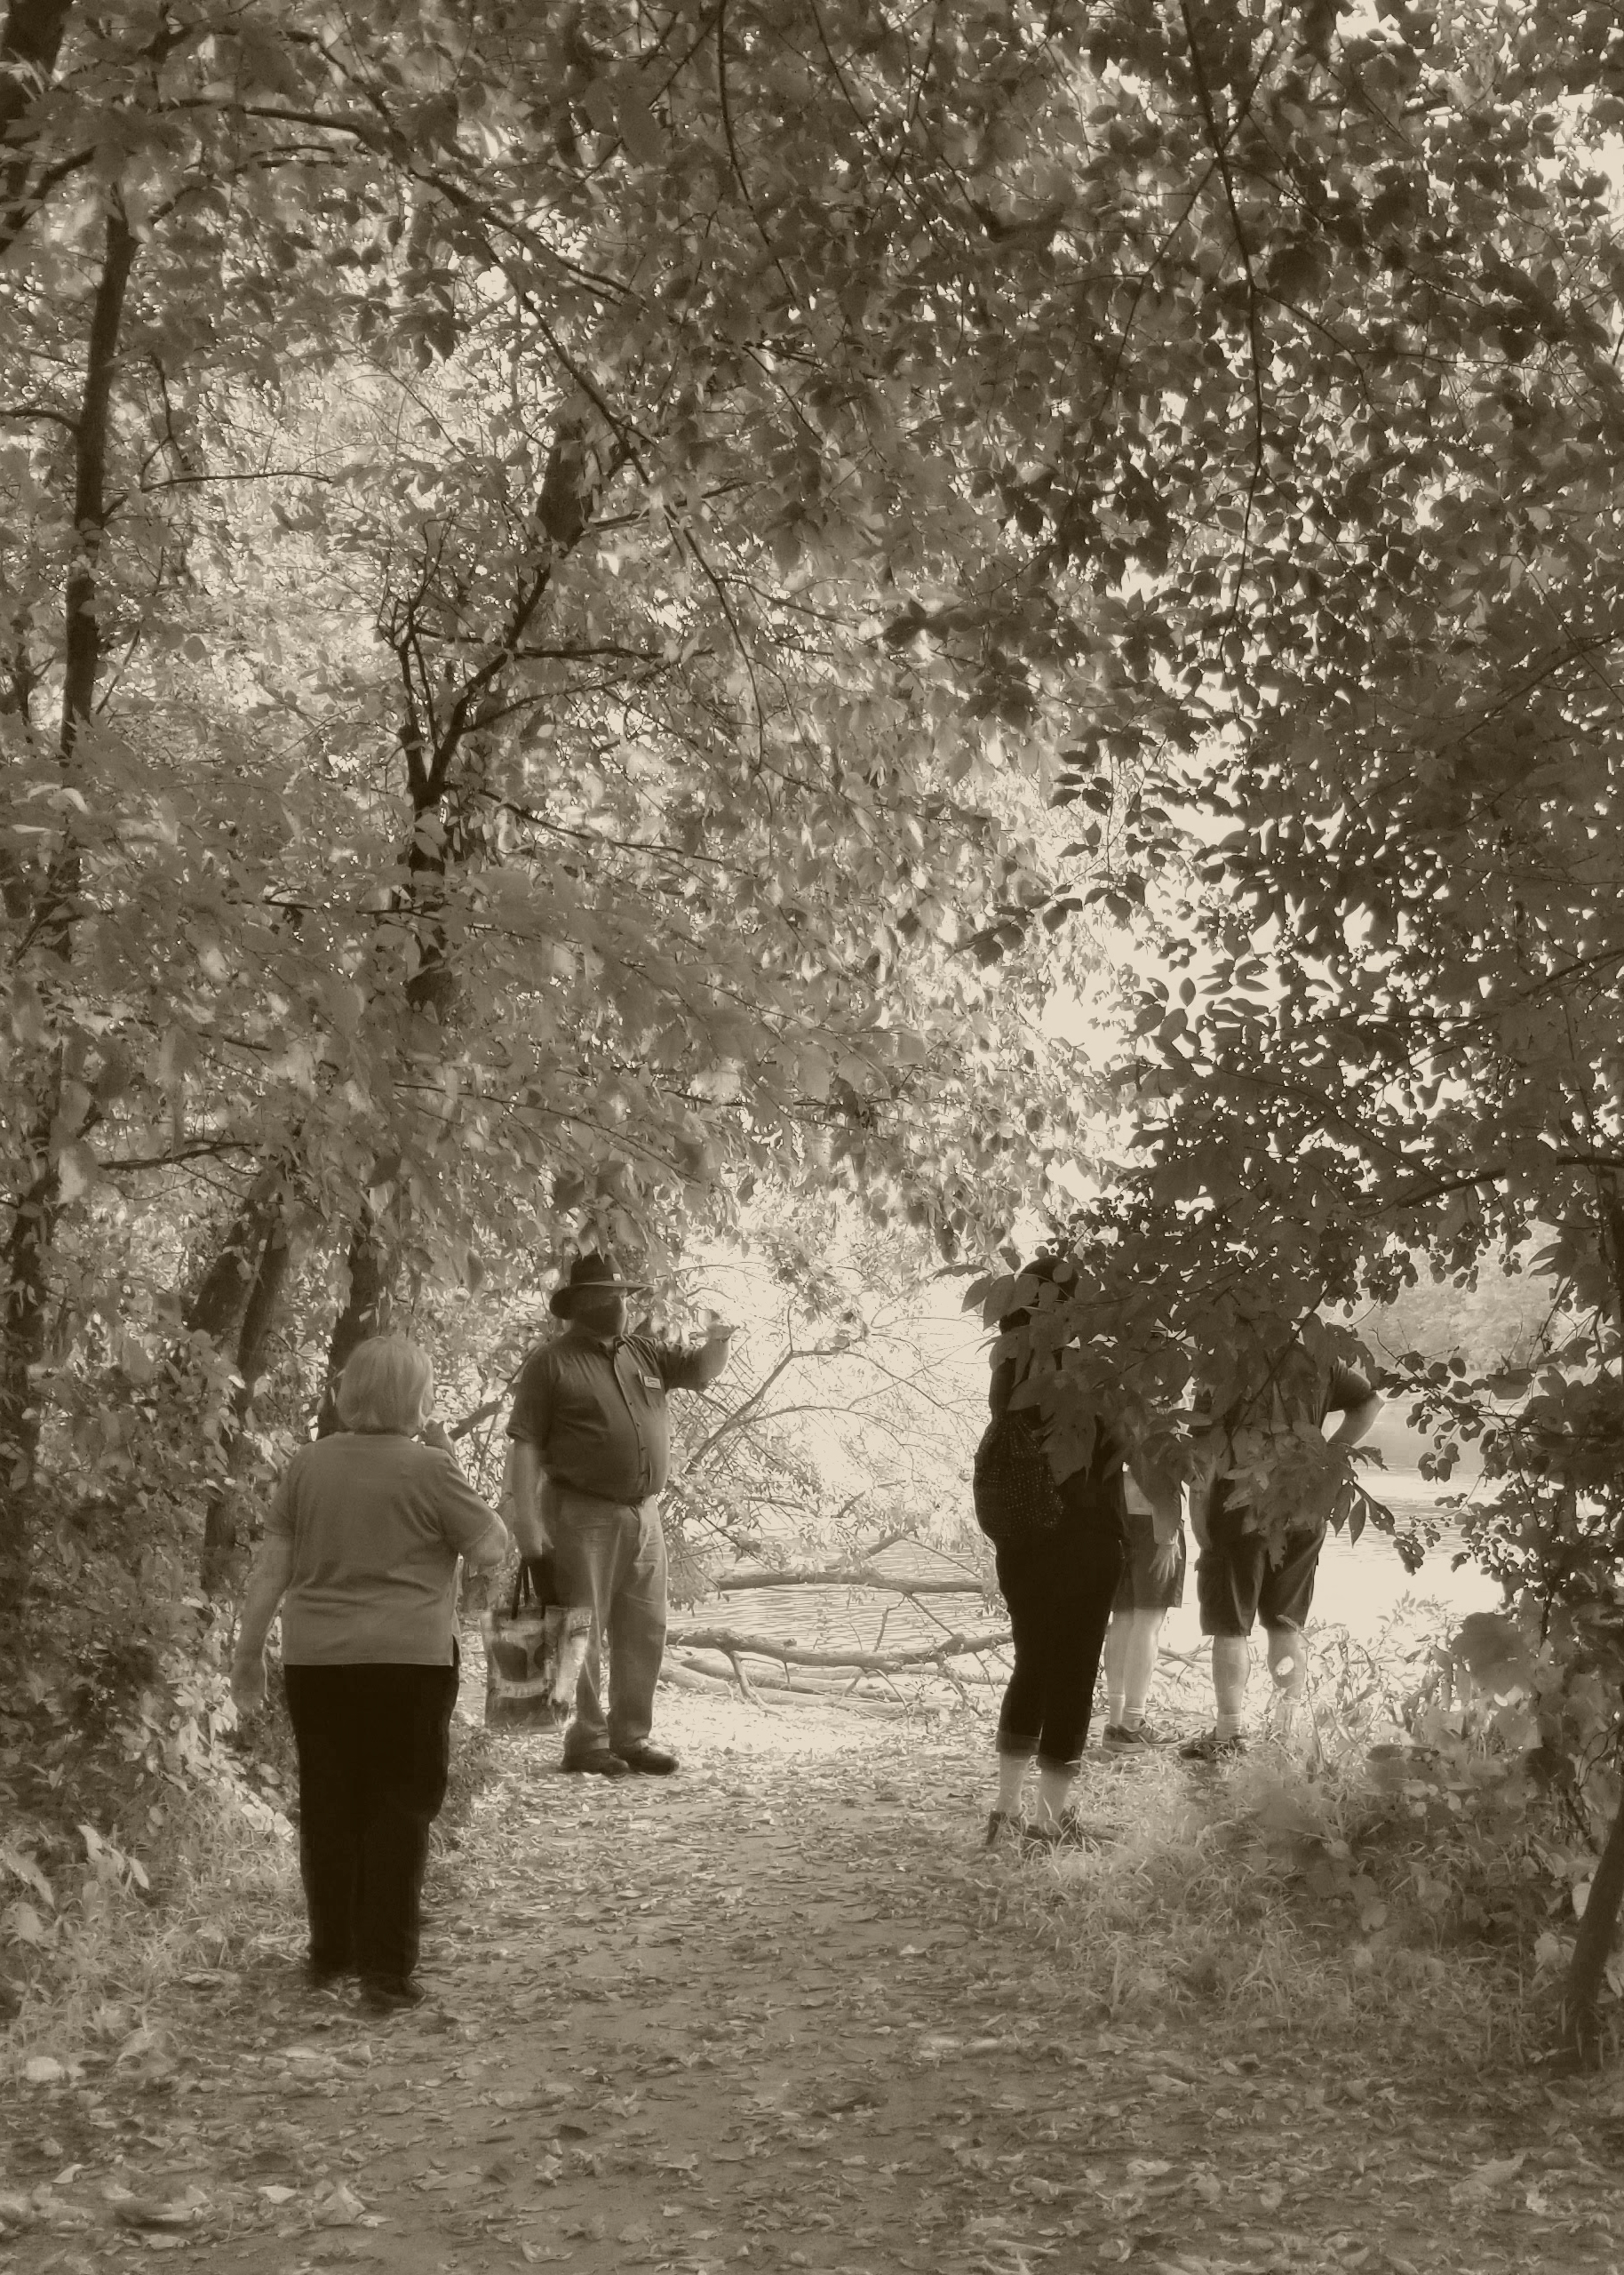 Sepia-toned image of a group walking along a path in a wooded area